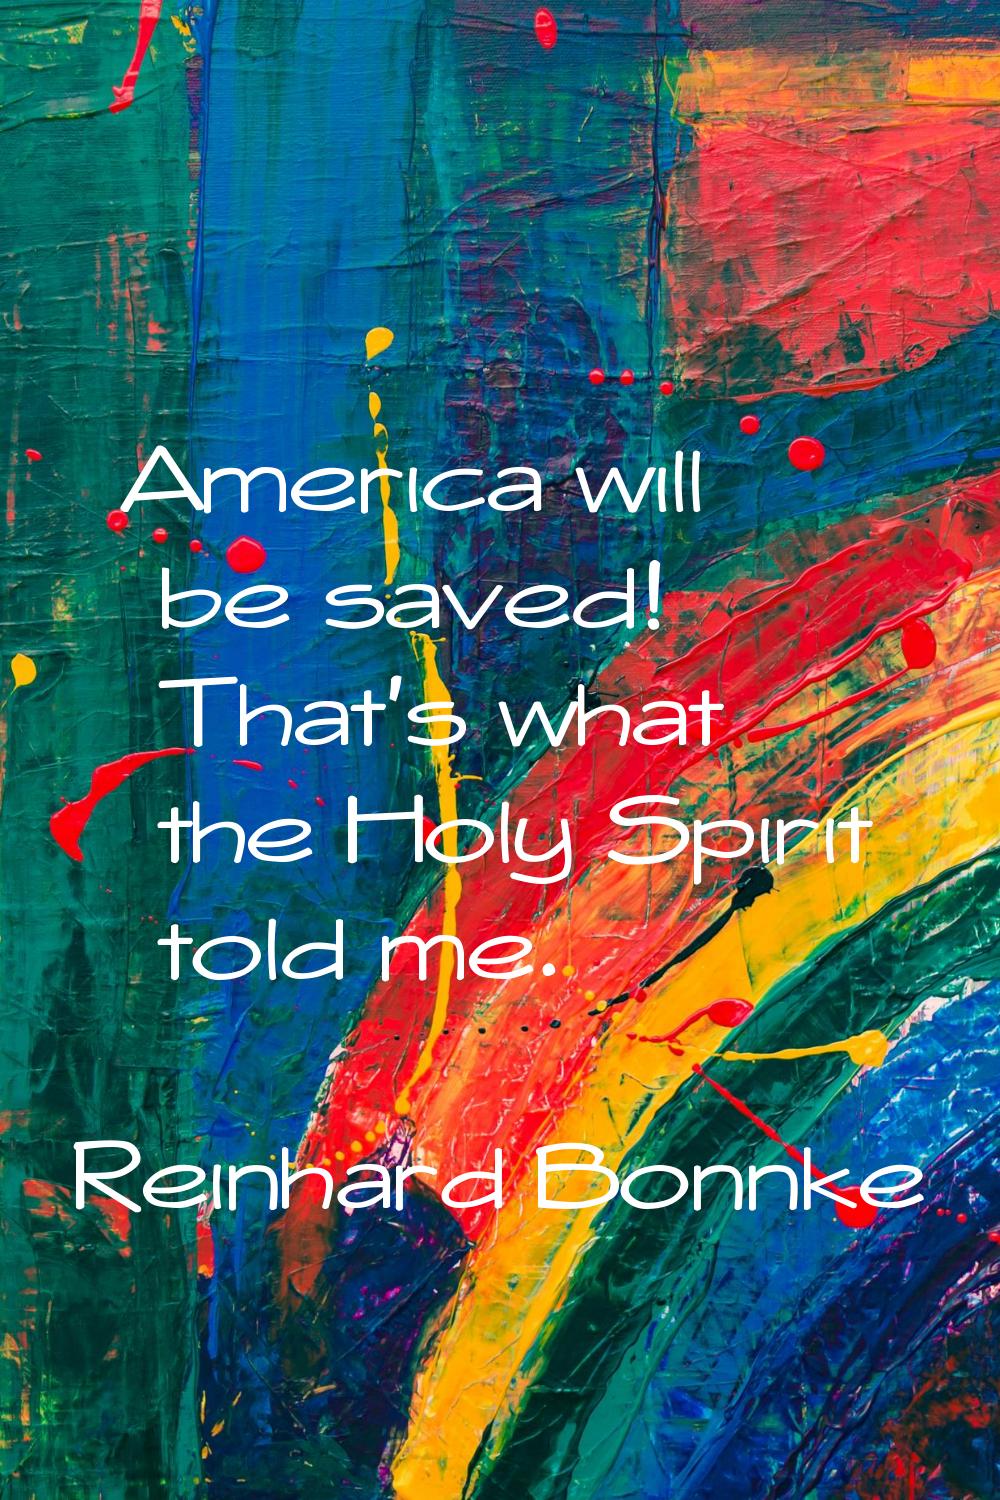 America will be saved! That's what the Holy Spirit told me.